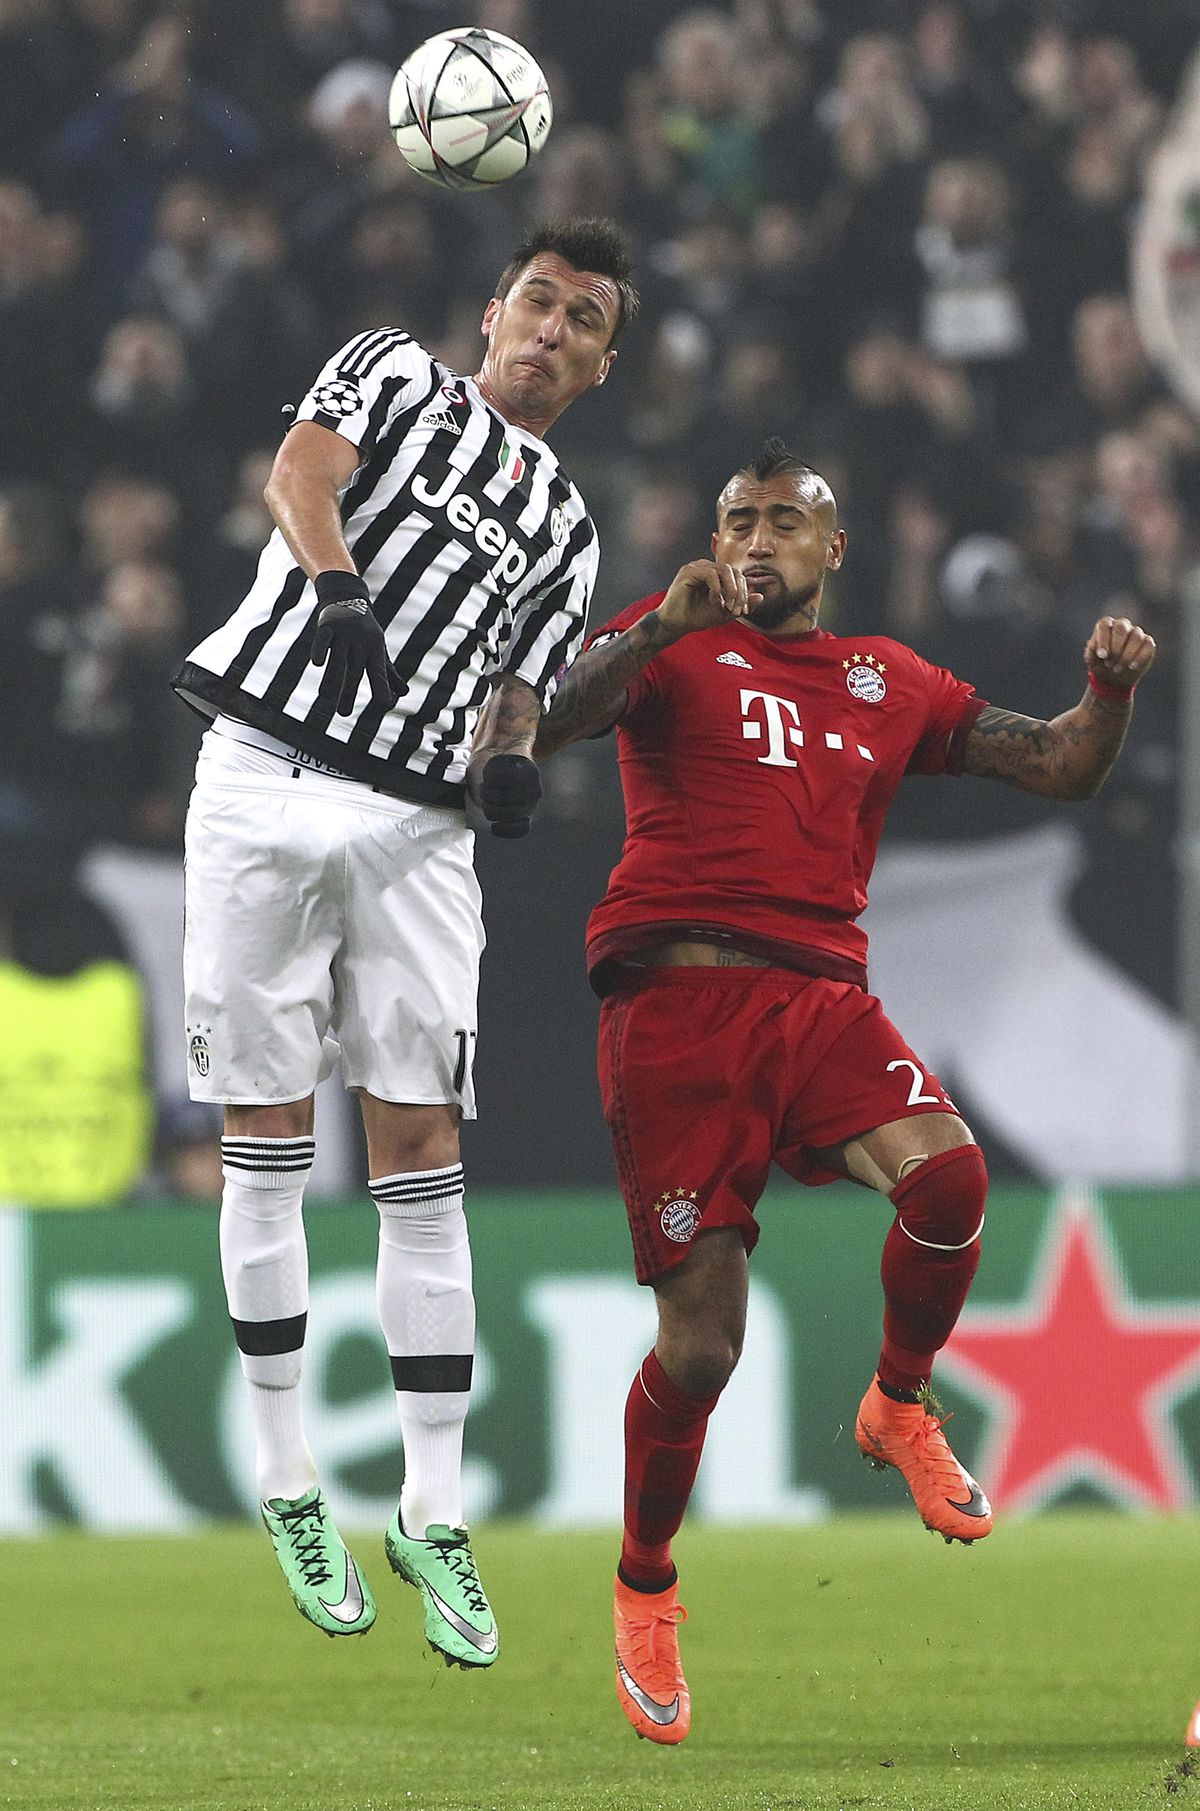 Juventus  v FC Bayern Muenchen  - UEFA Champions League Round of 16